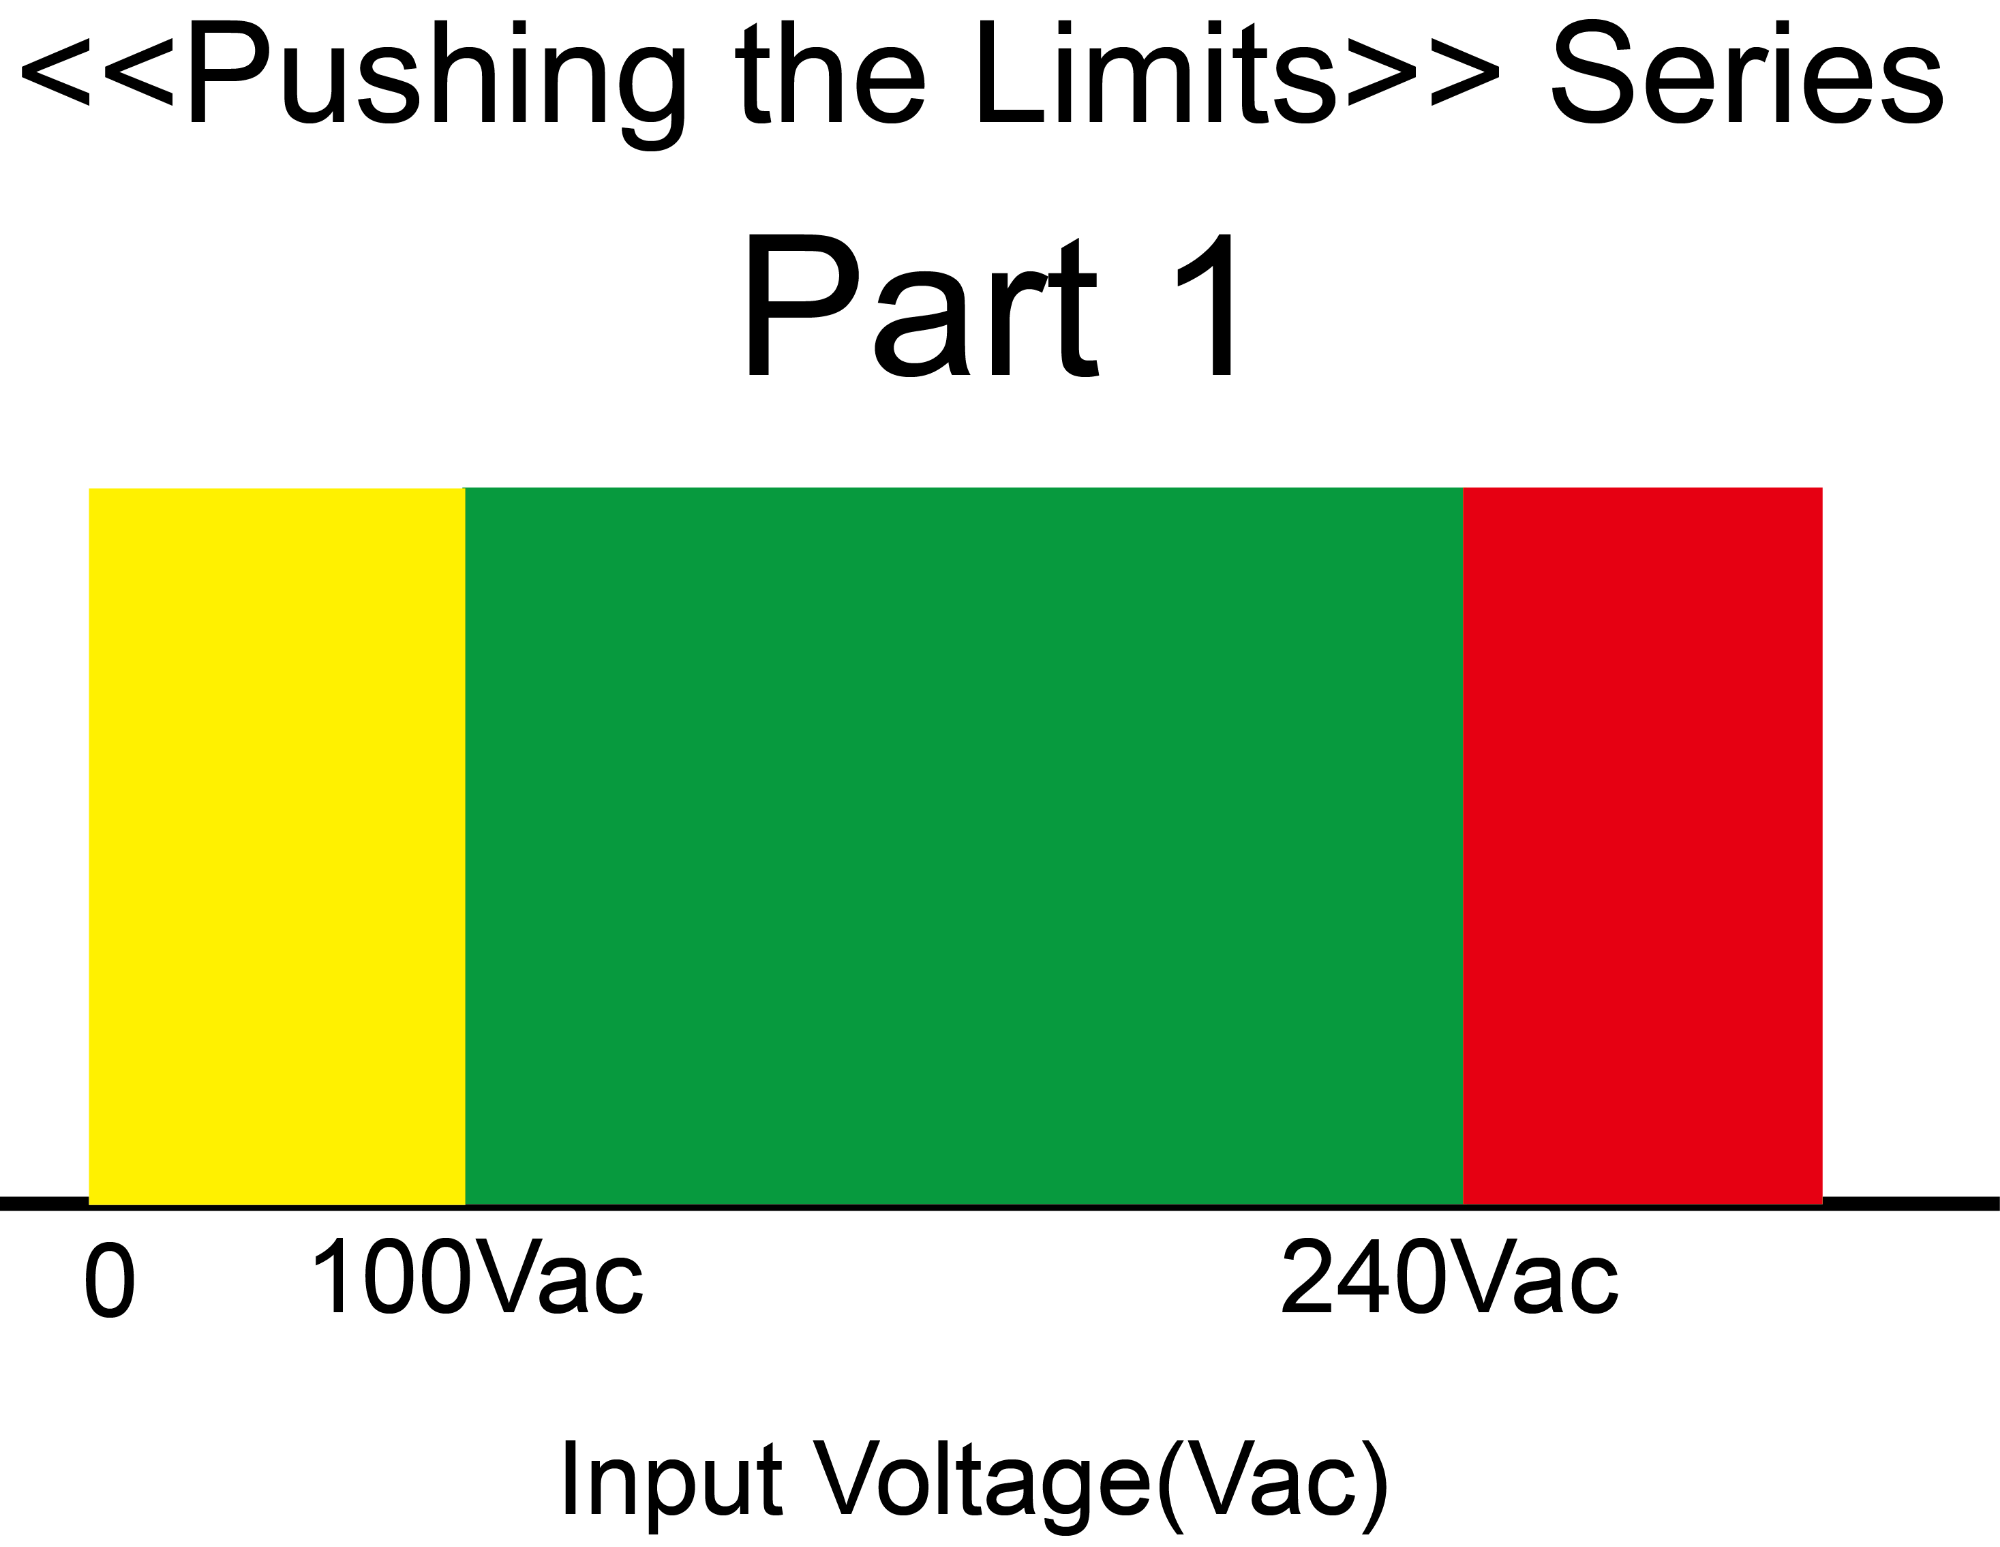 What Can Happen When Input Voltage Exceed a Power Supply's Range?